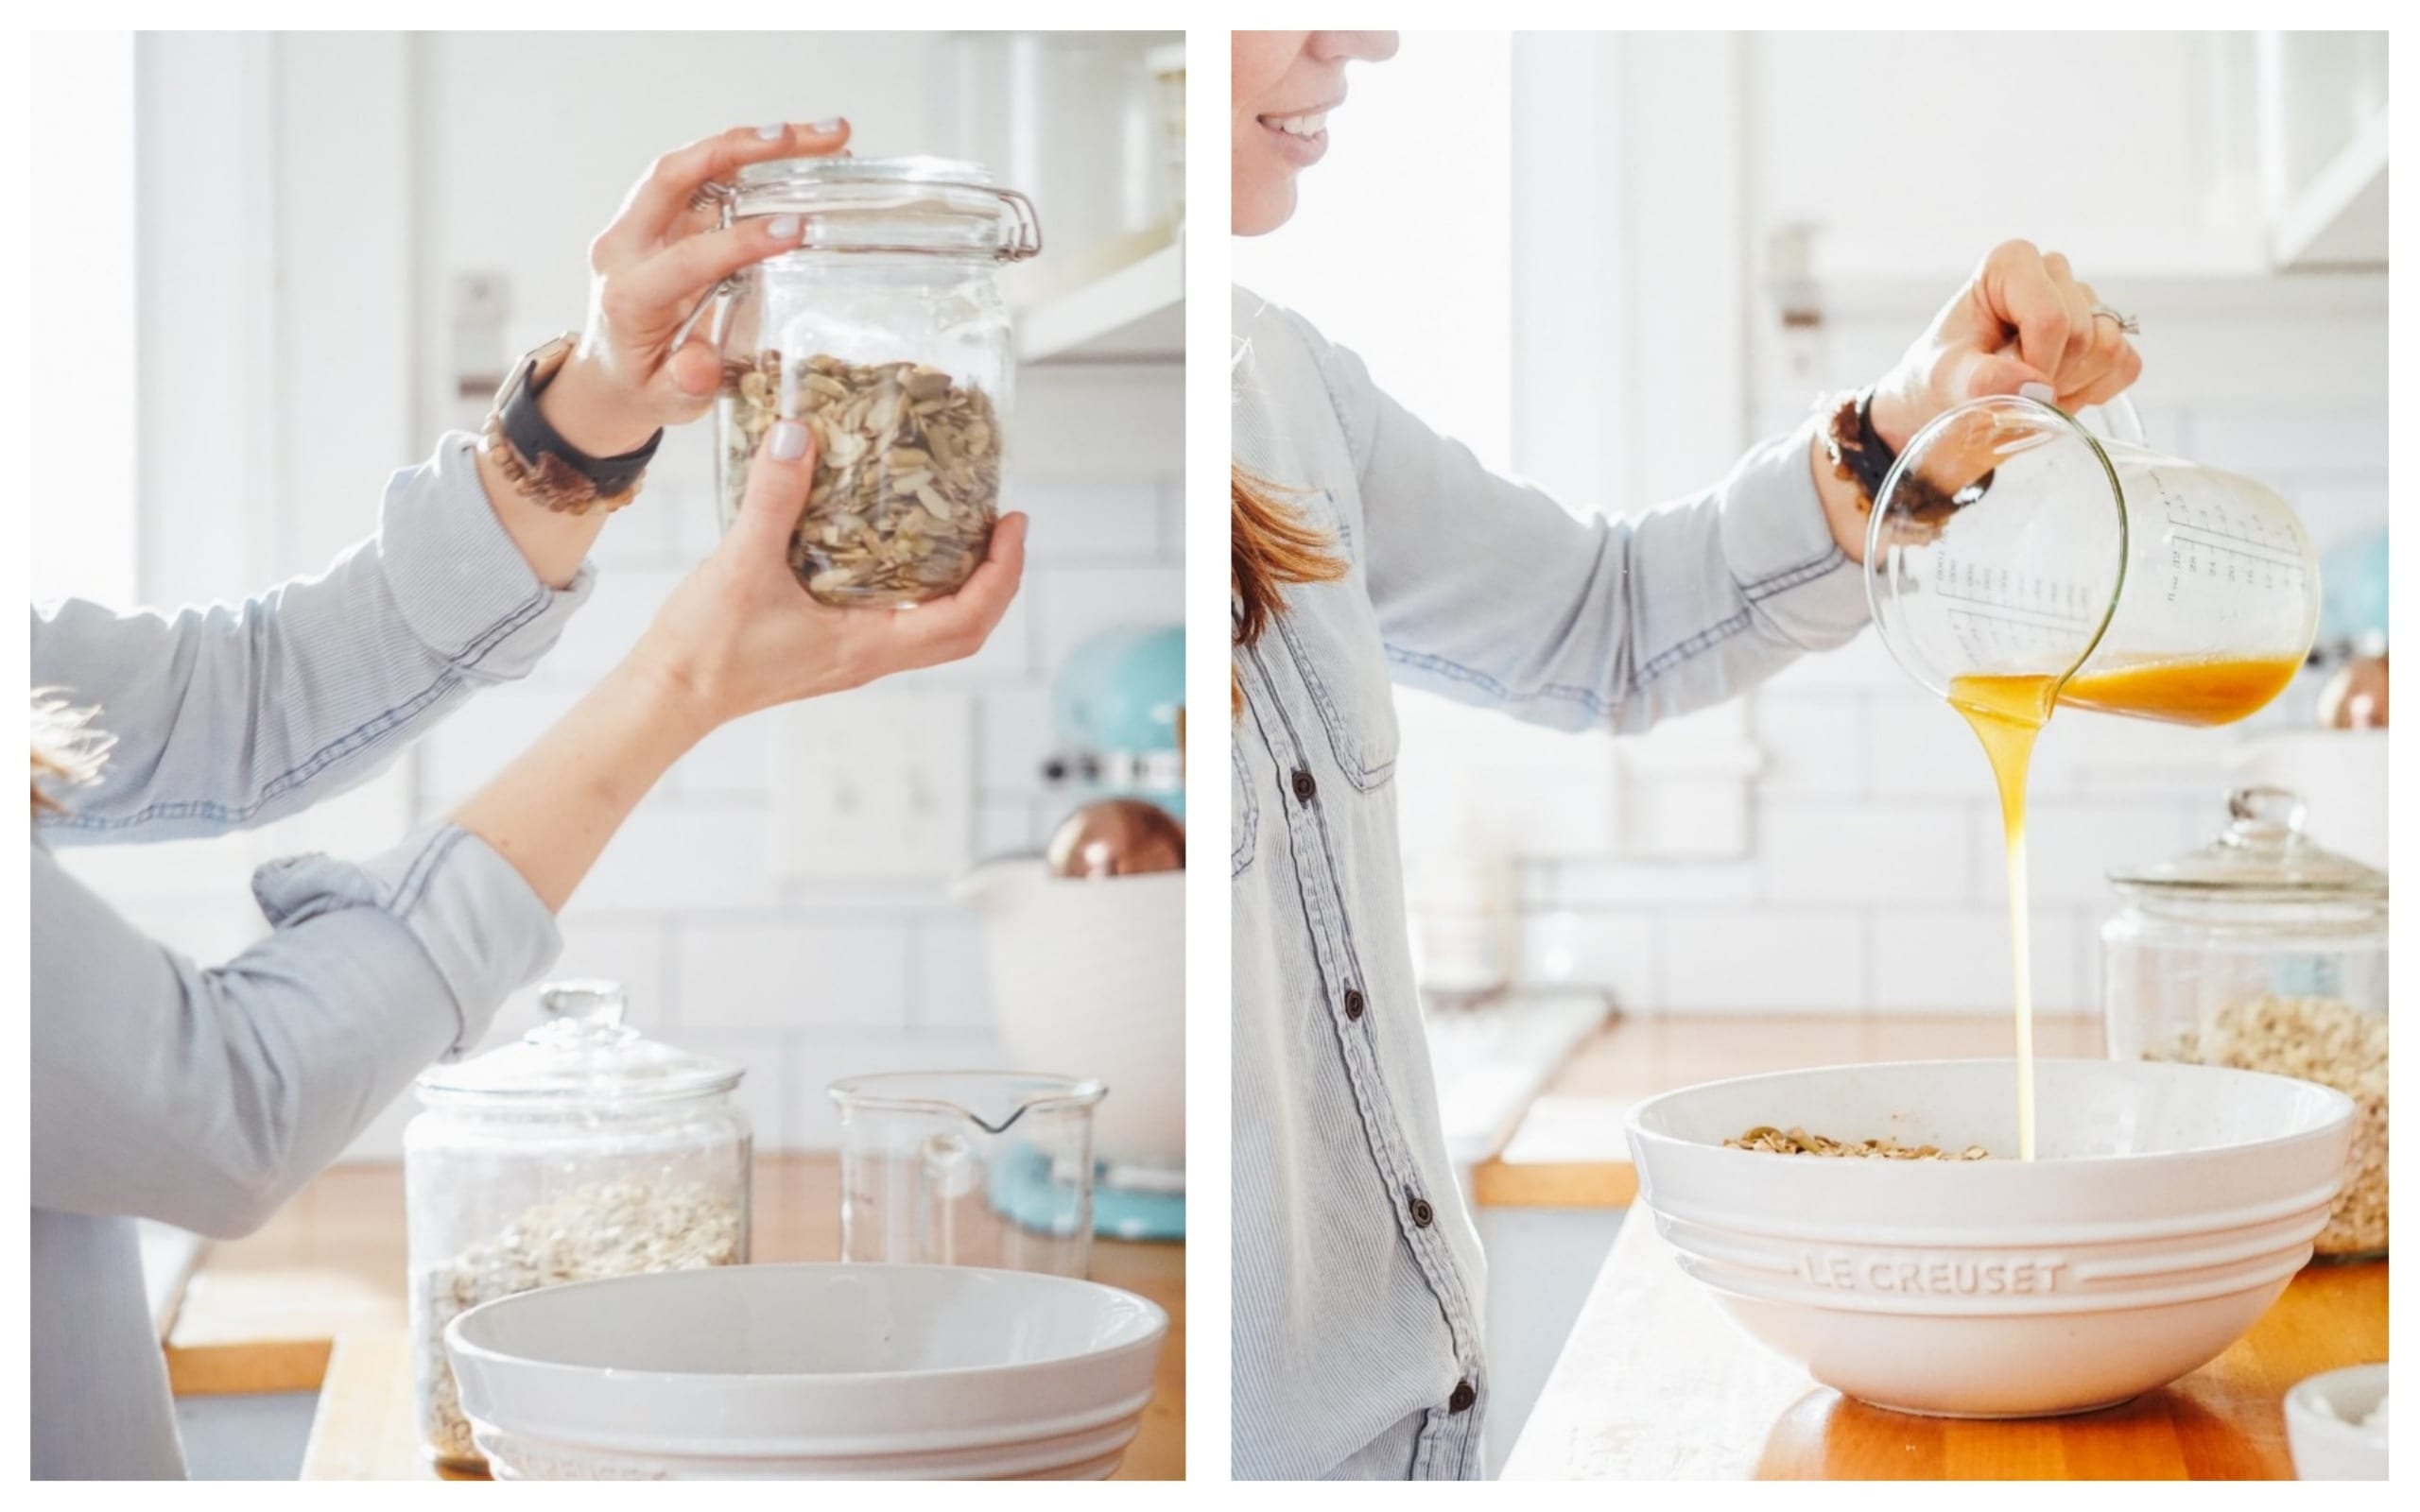 A homemade master granola recipe you can customize to make your own. Use the base recipe, and then choose any spice, dried fruit, or nuts/seeds desired.